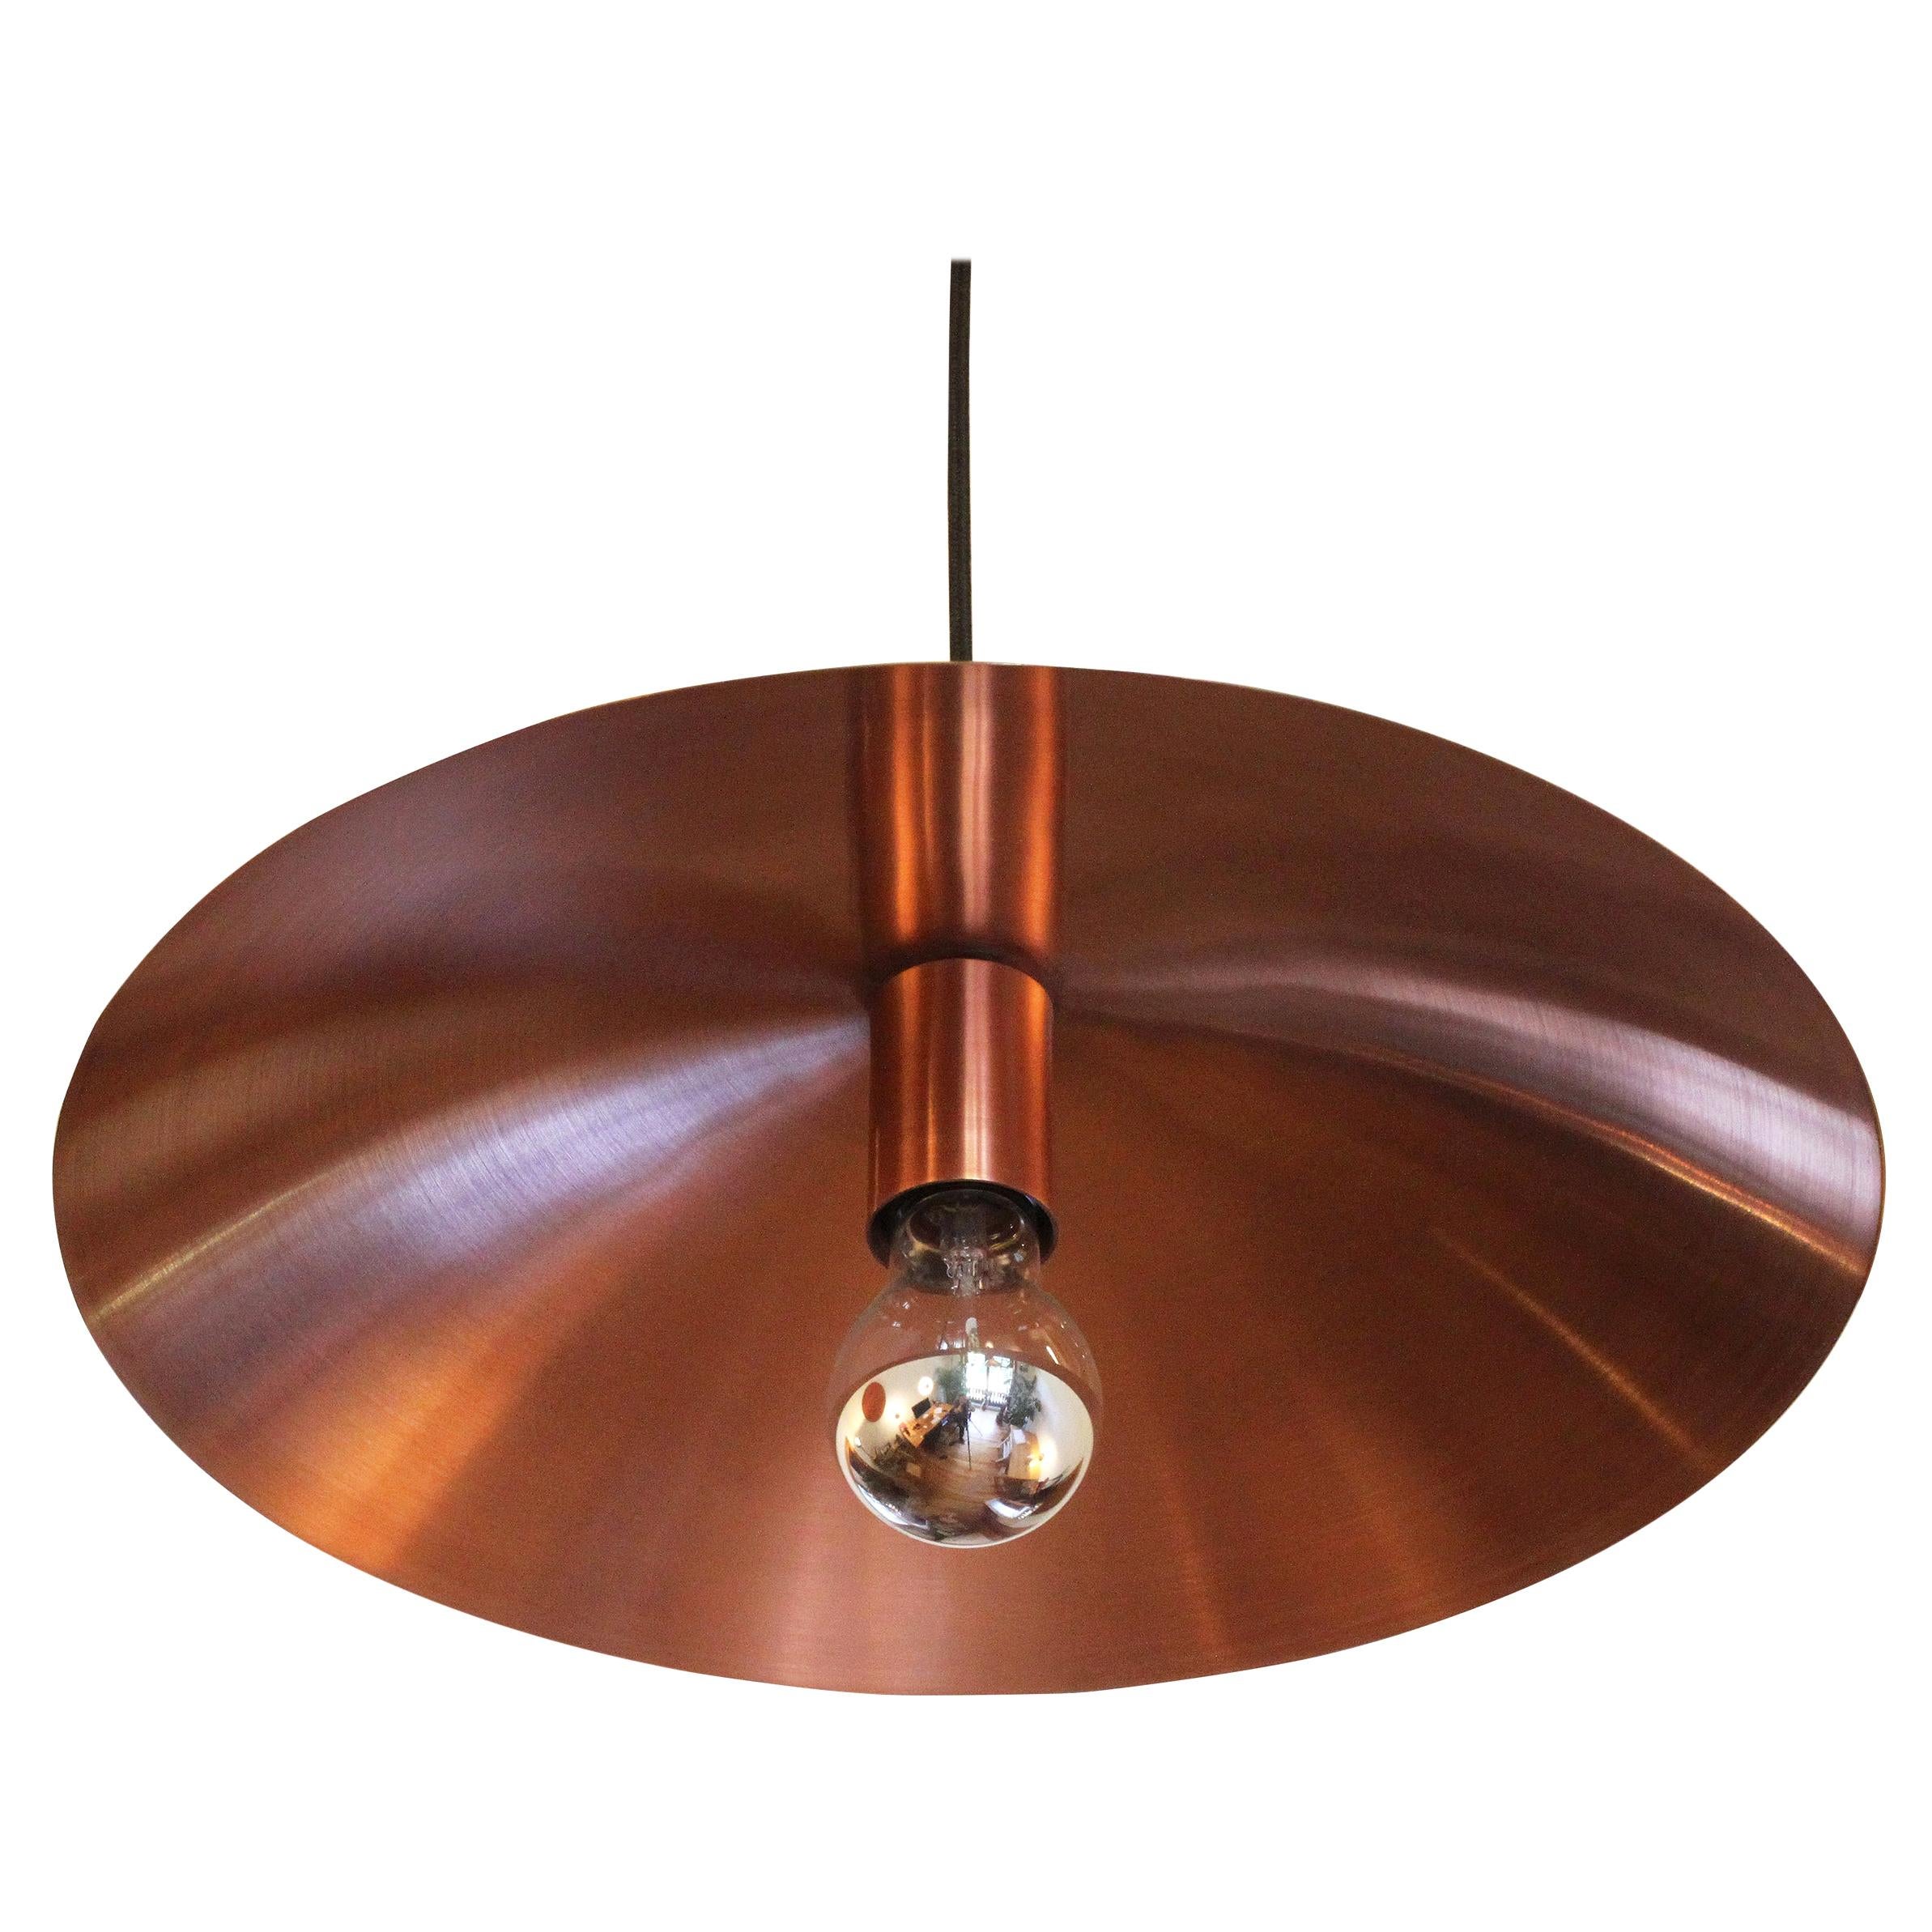 Plato Abajo 40 Pendant Lamp, Maria Beckmann, Represented by Tuleste Factory For Sale